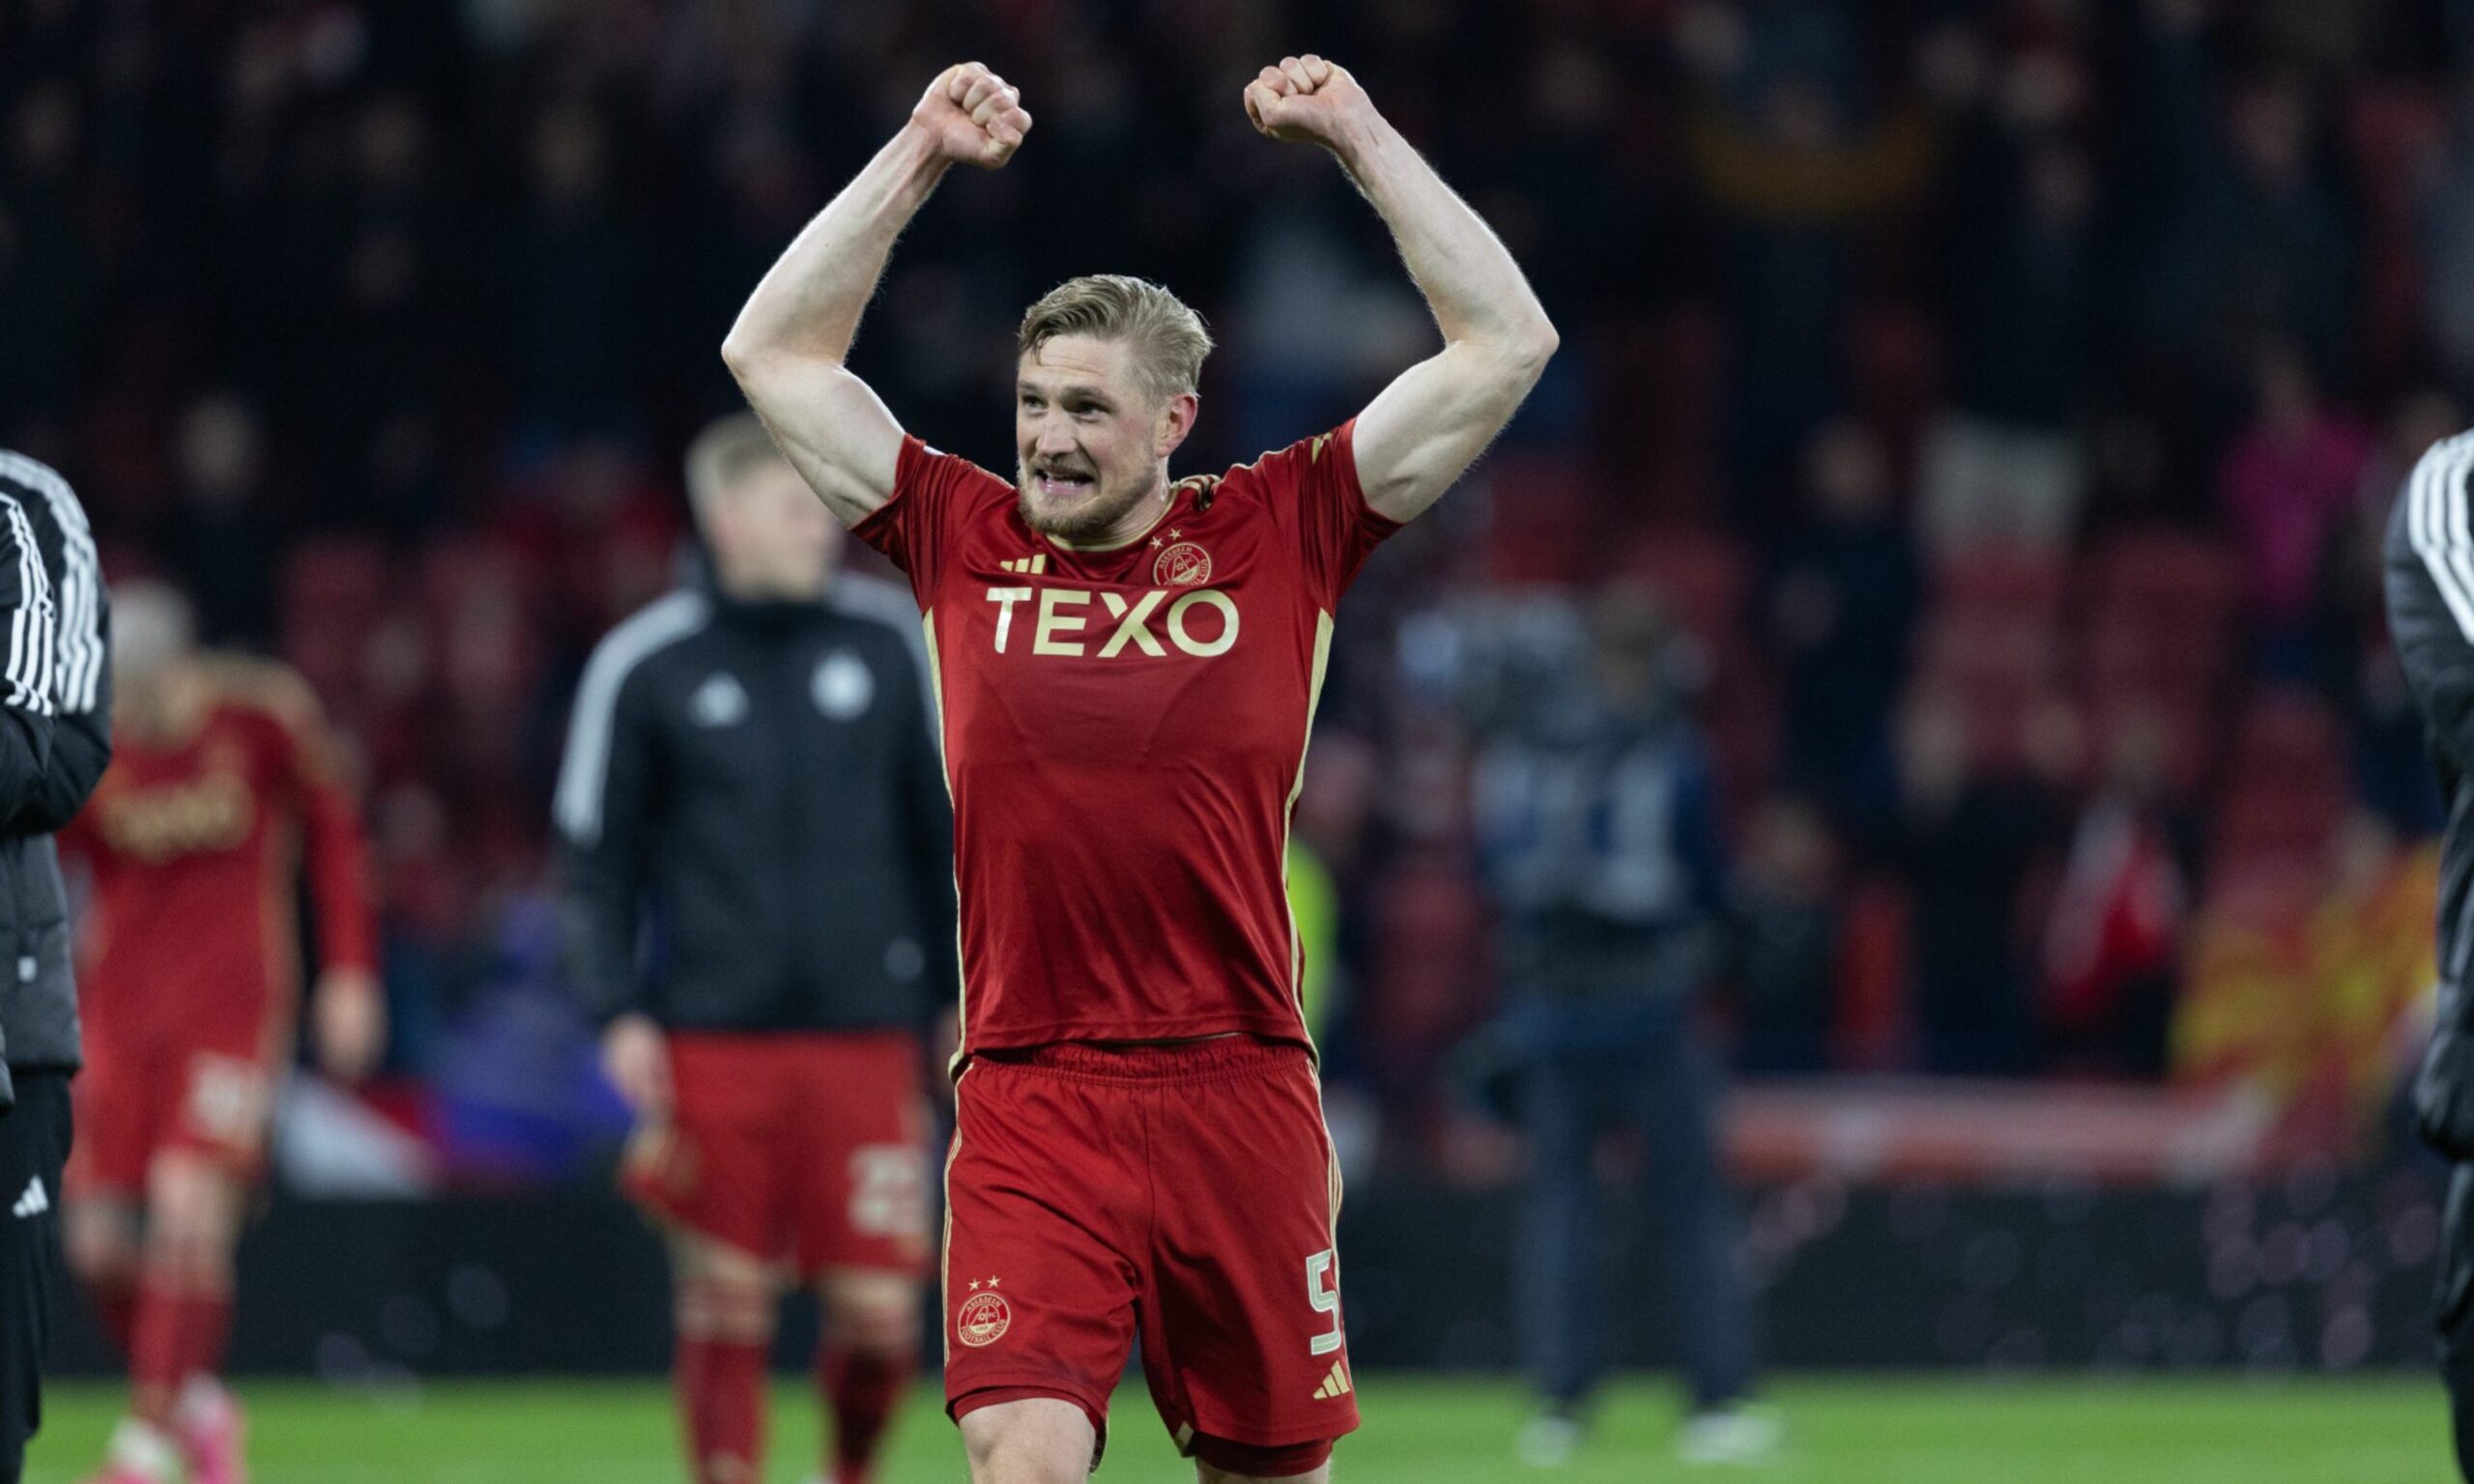 Richard Jensen celebrating on the pitch with his arms in the air